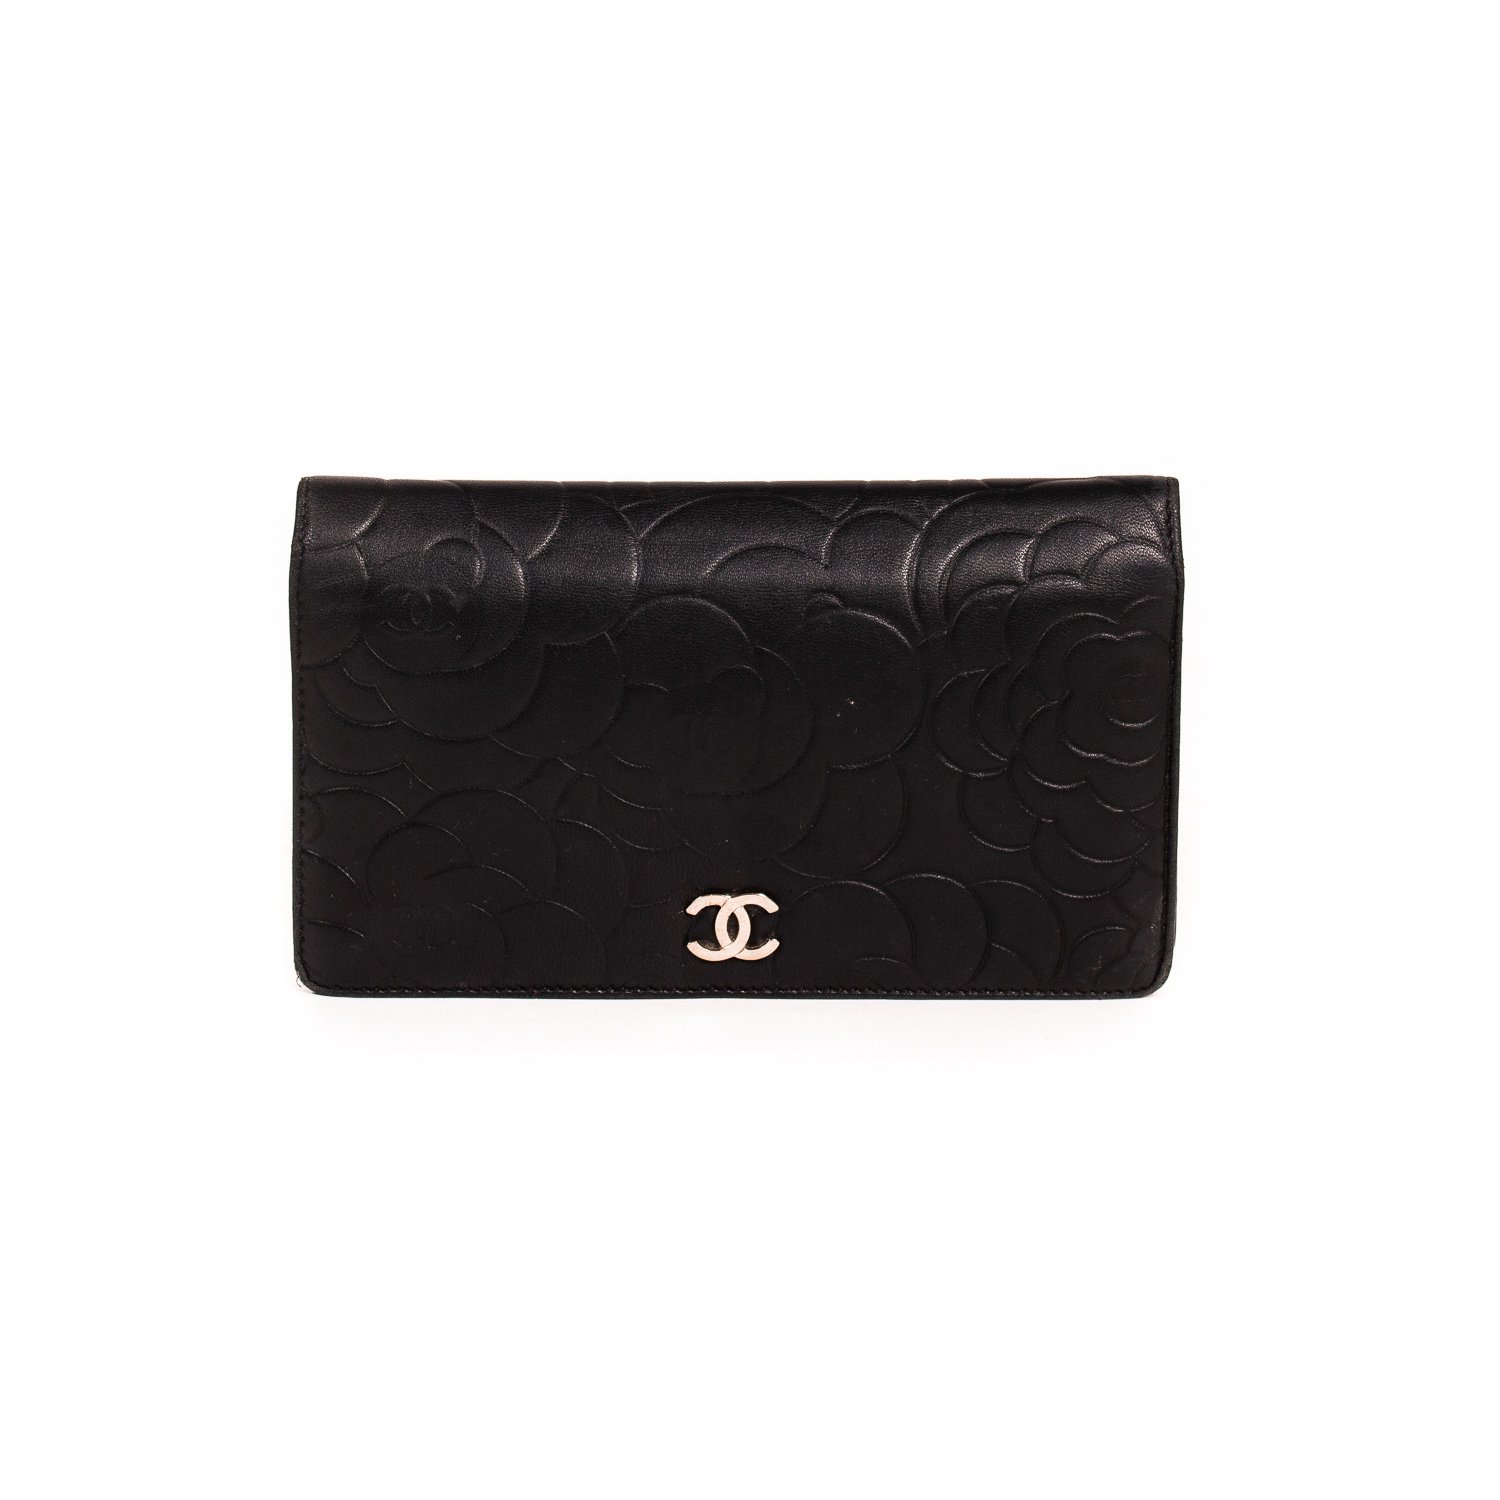 Chanel Black Embossed Leather Camellia Bifold Flap Wallet